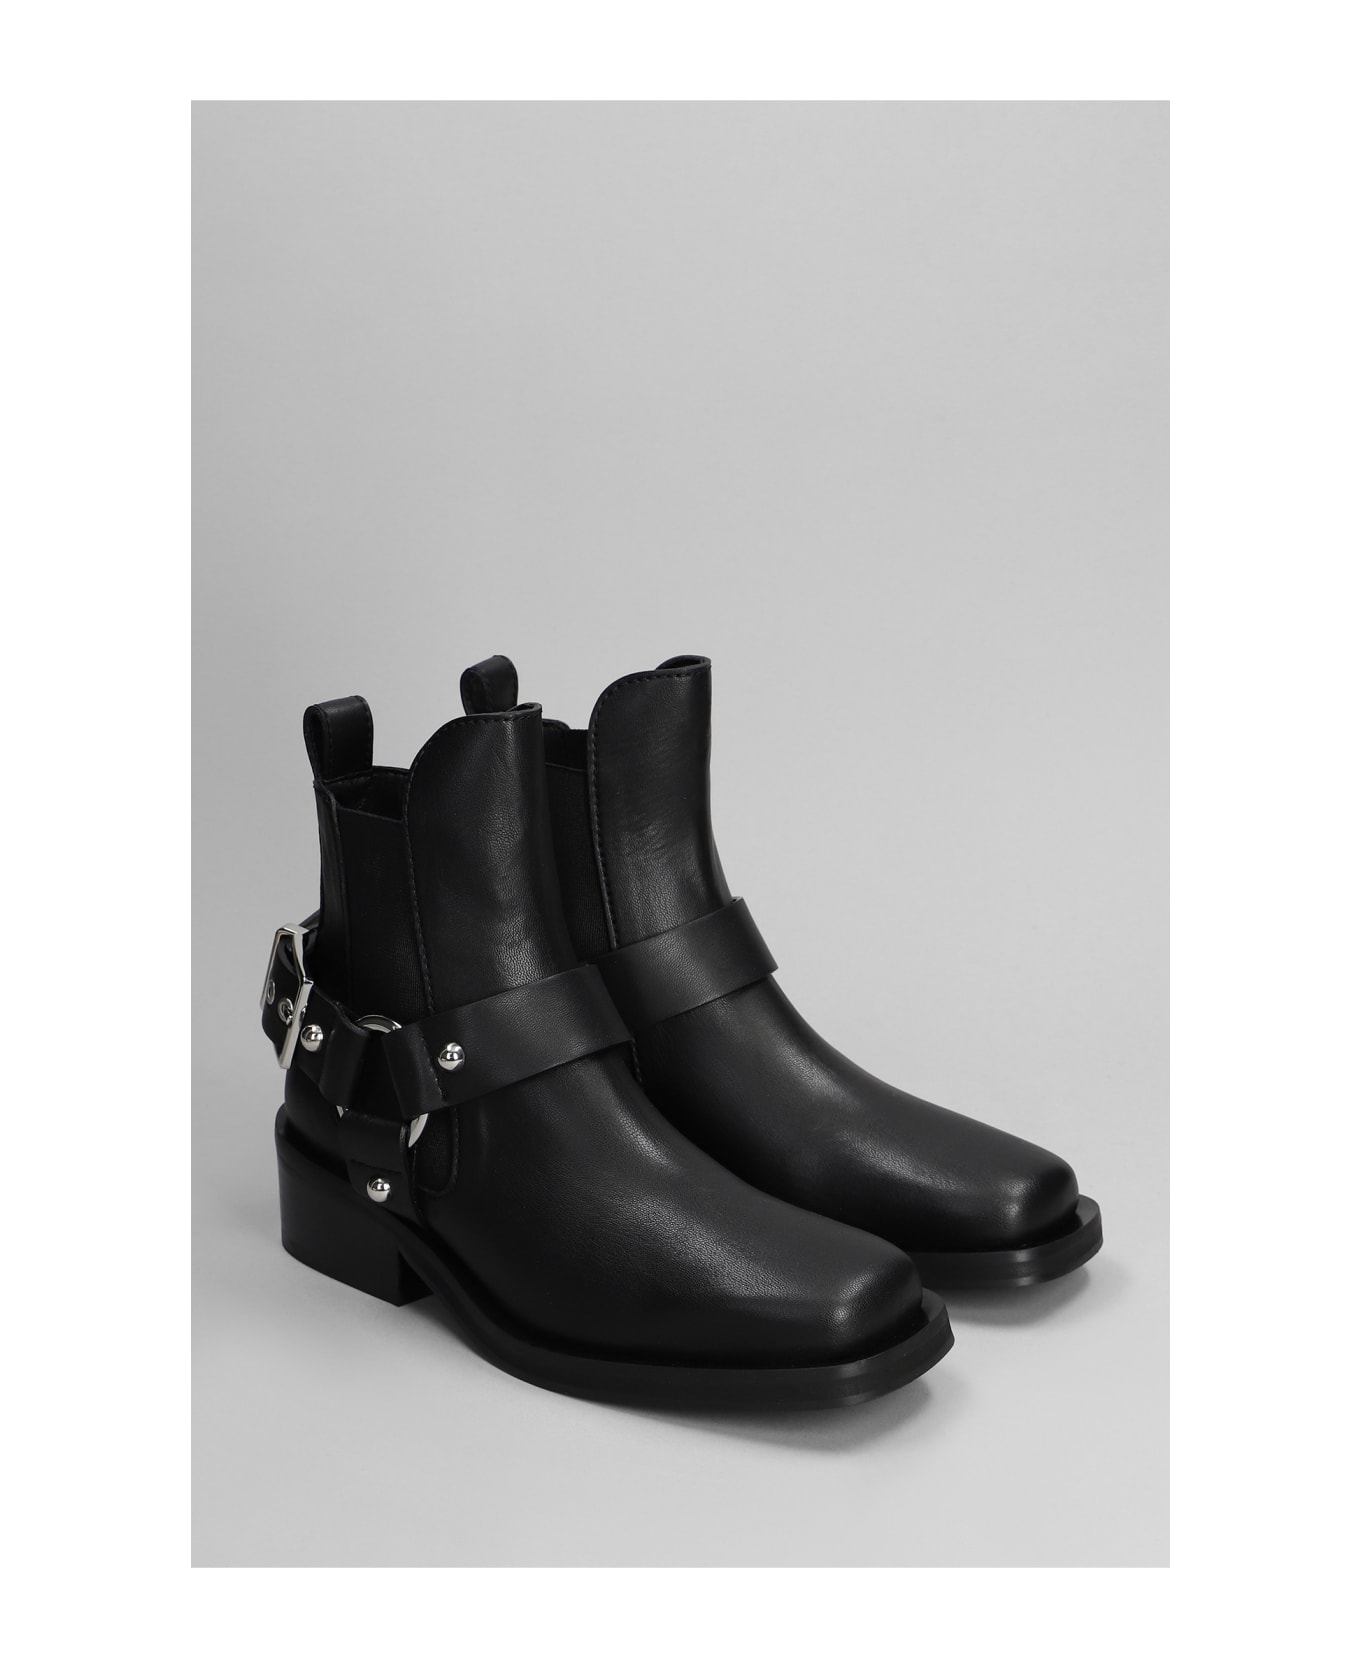 Ganni High Heels Ankle Boots In Black Leather - Black ブーツ